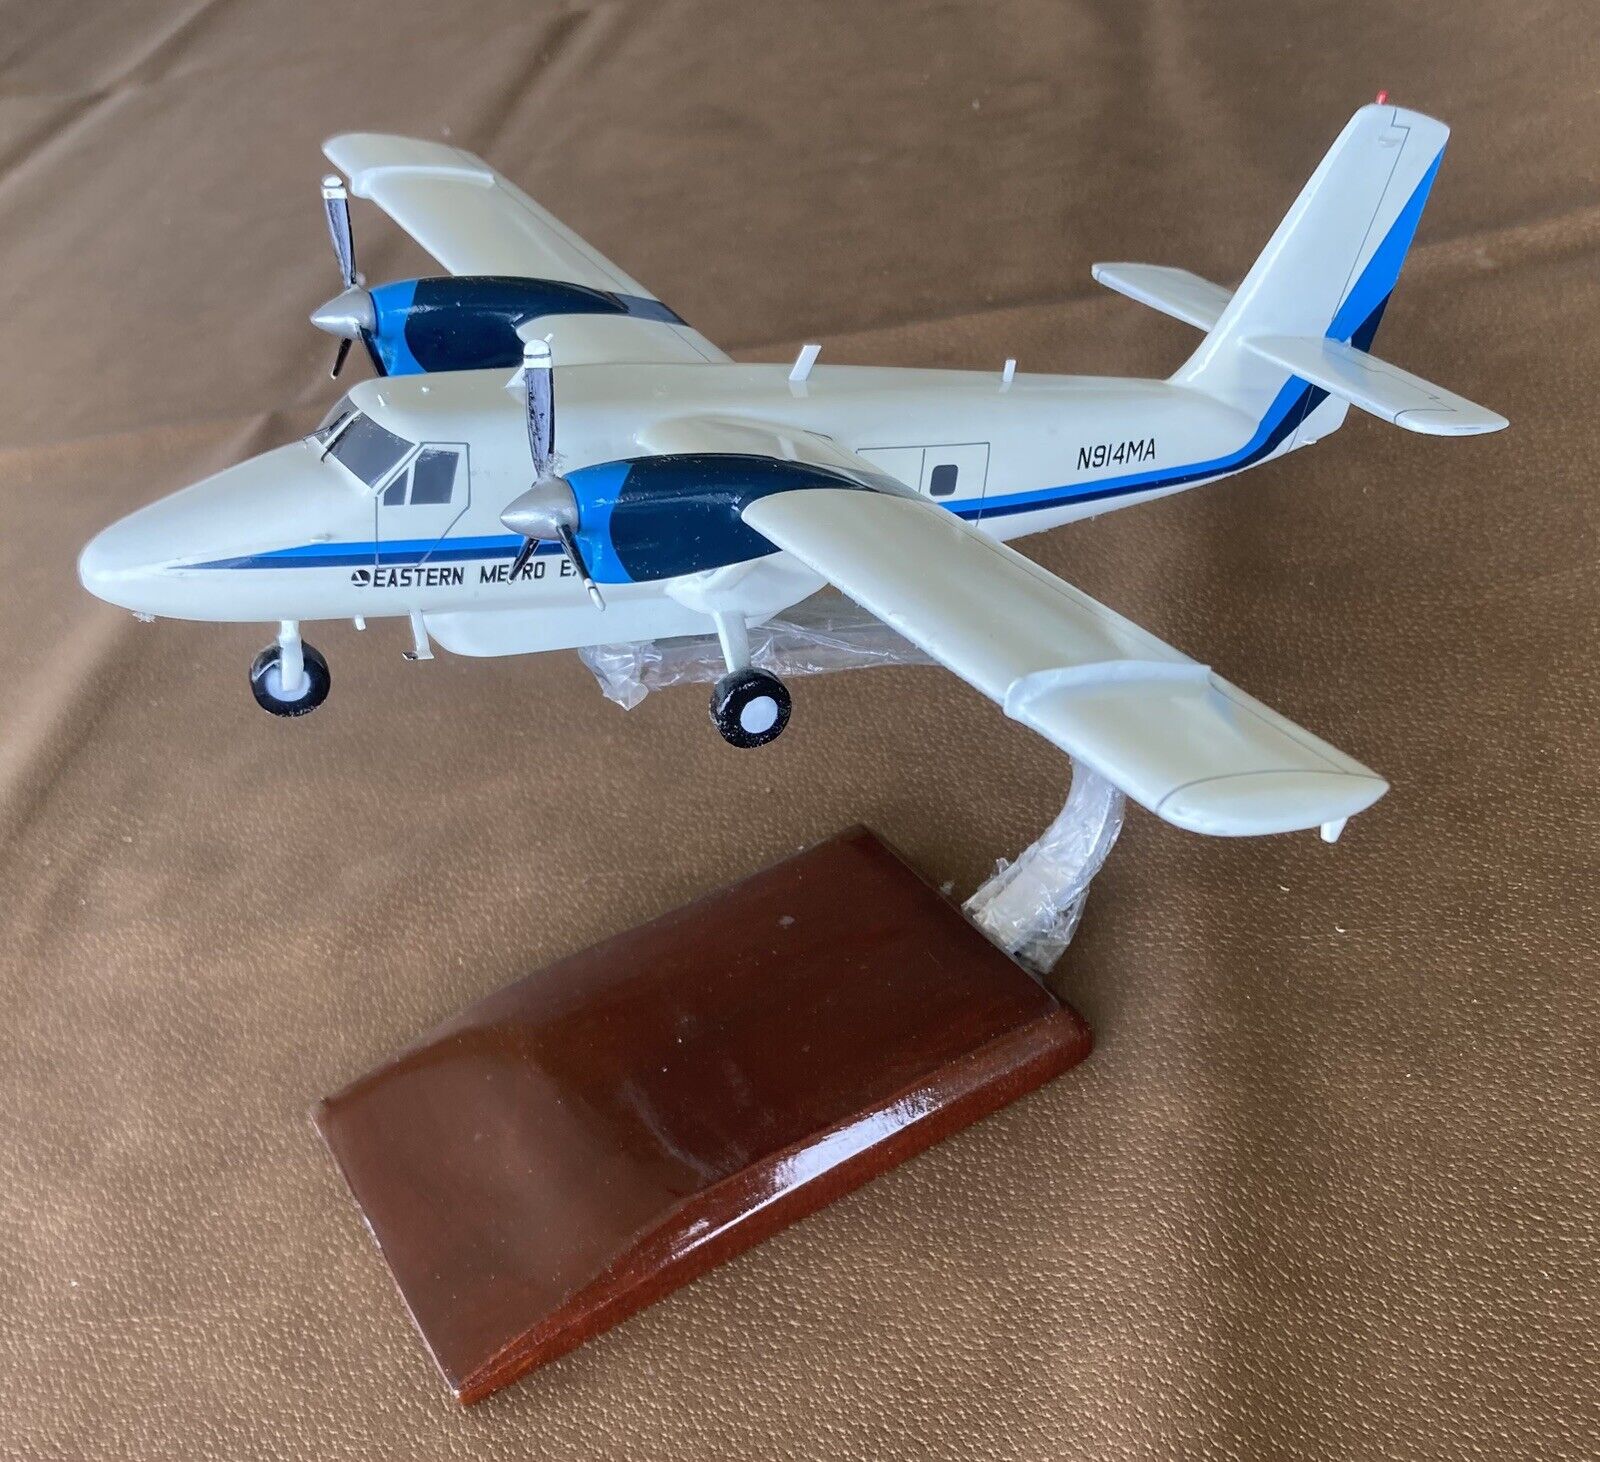 Eastern Metro Express DHC-6, Twin Otter. Hand made Mahogany Wood Model